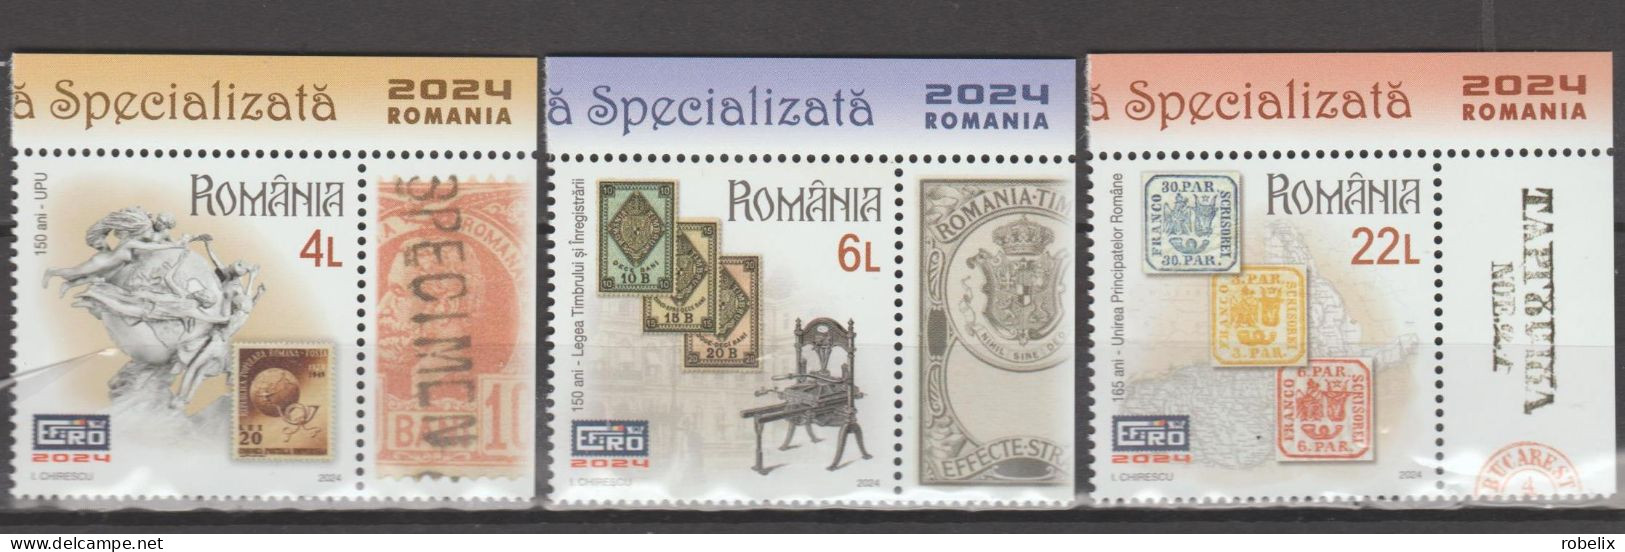 ROMANIA 2024 EFIRO - WORLD STAMP EXHIBITION IN BUCHAREST Set Of 3 Stamps With Tabs  MNH** - Exposiciones Filatélicas